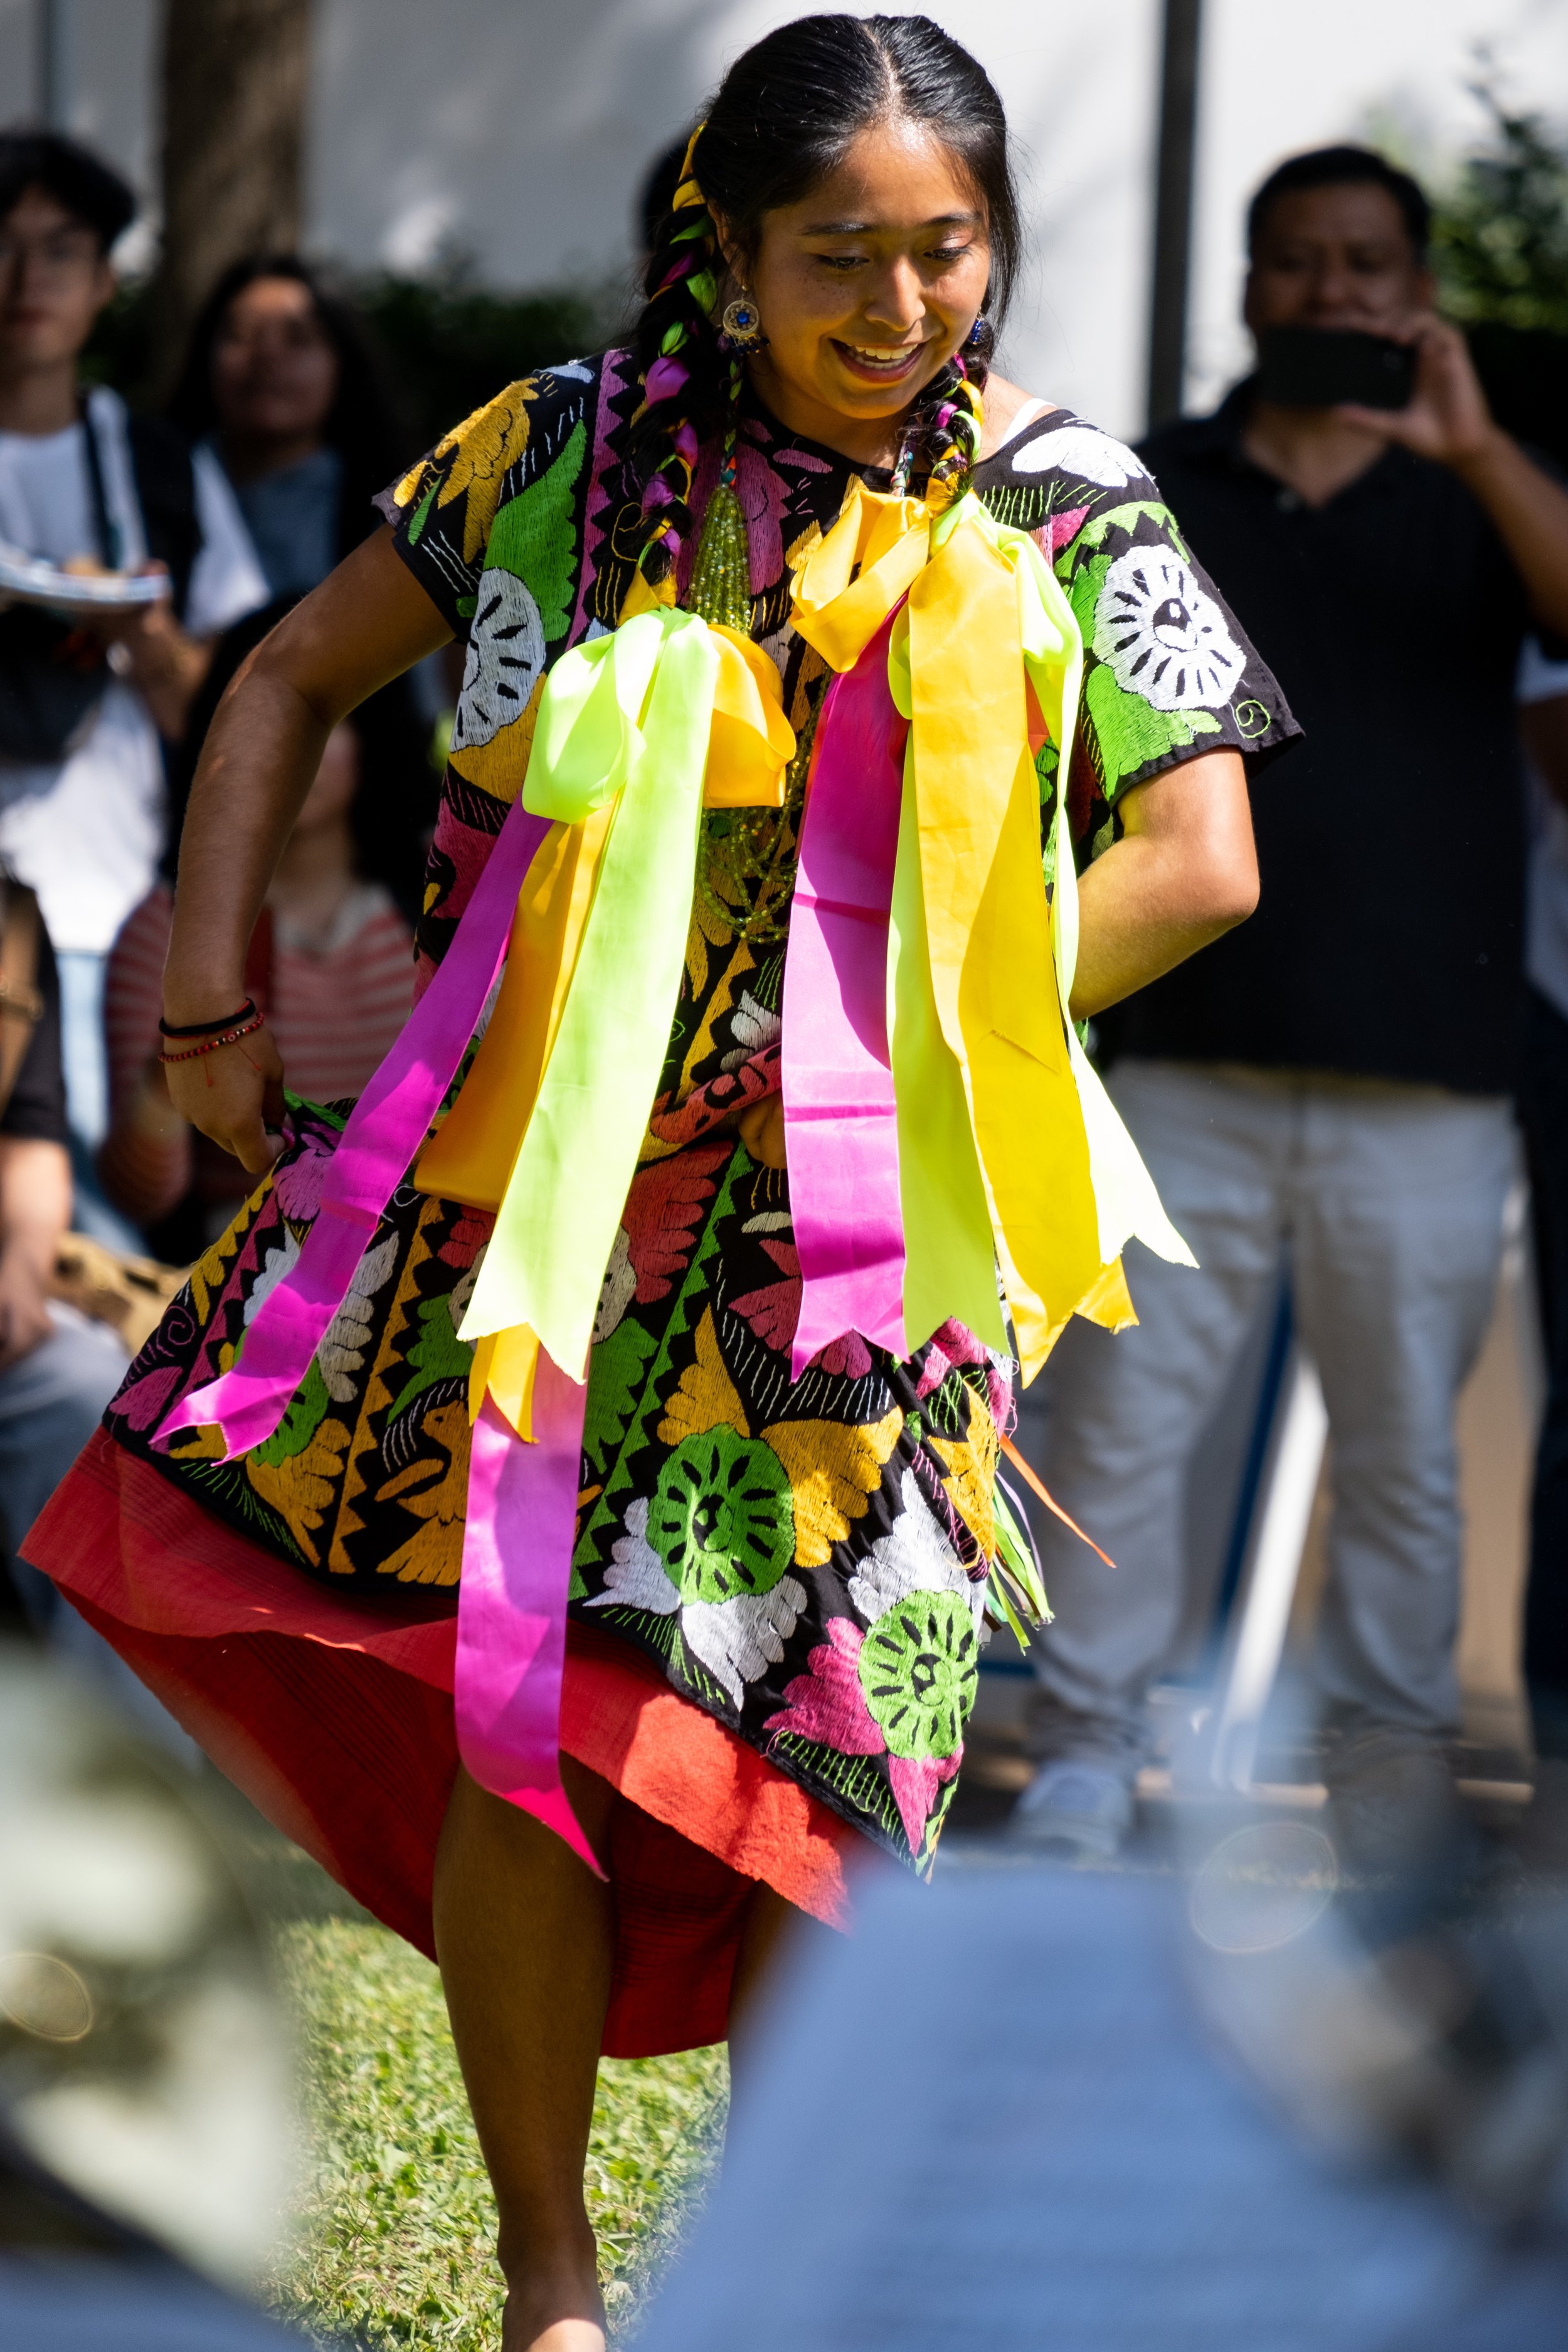  Victoria Isabella Hernandez, economics major from San Miguel del Valle, Oaxaca performs a Oaxacan dance during the Guelaguetza event at the Santa Monica College Main Campus on Thursday, Sept. 28th in Santa Monica, Calif. (Akemi Rico | The Corsair) 